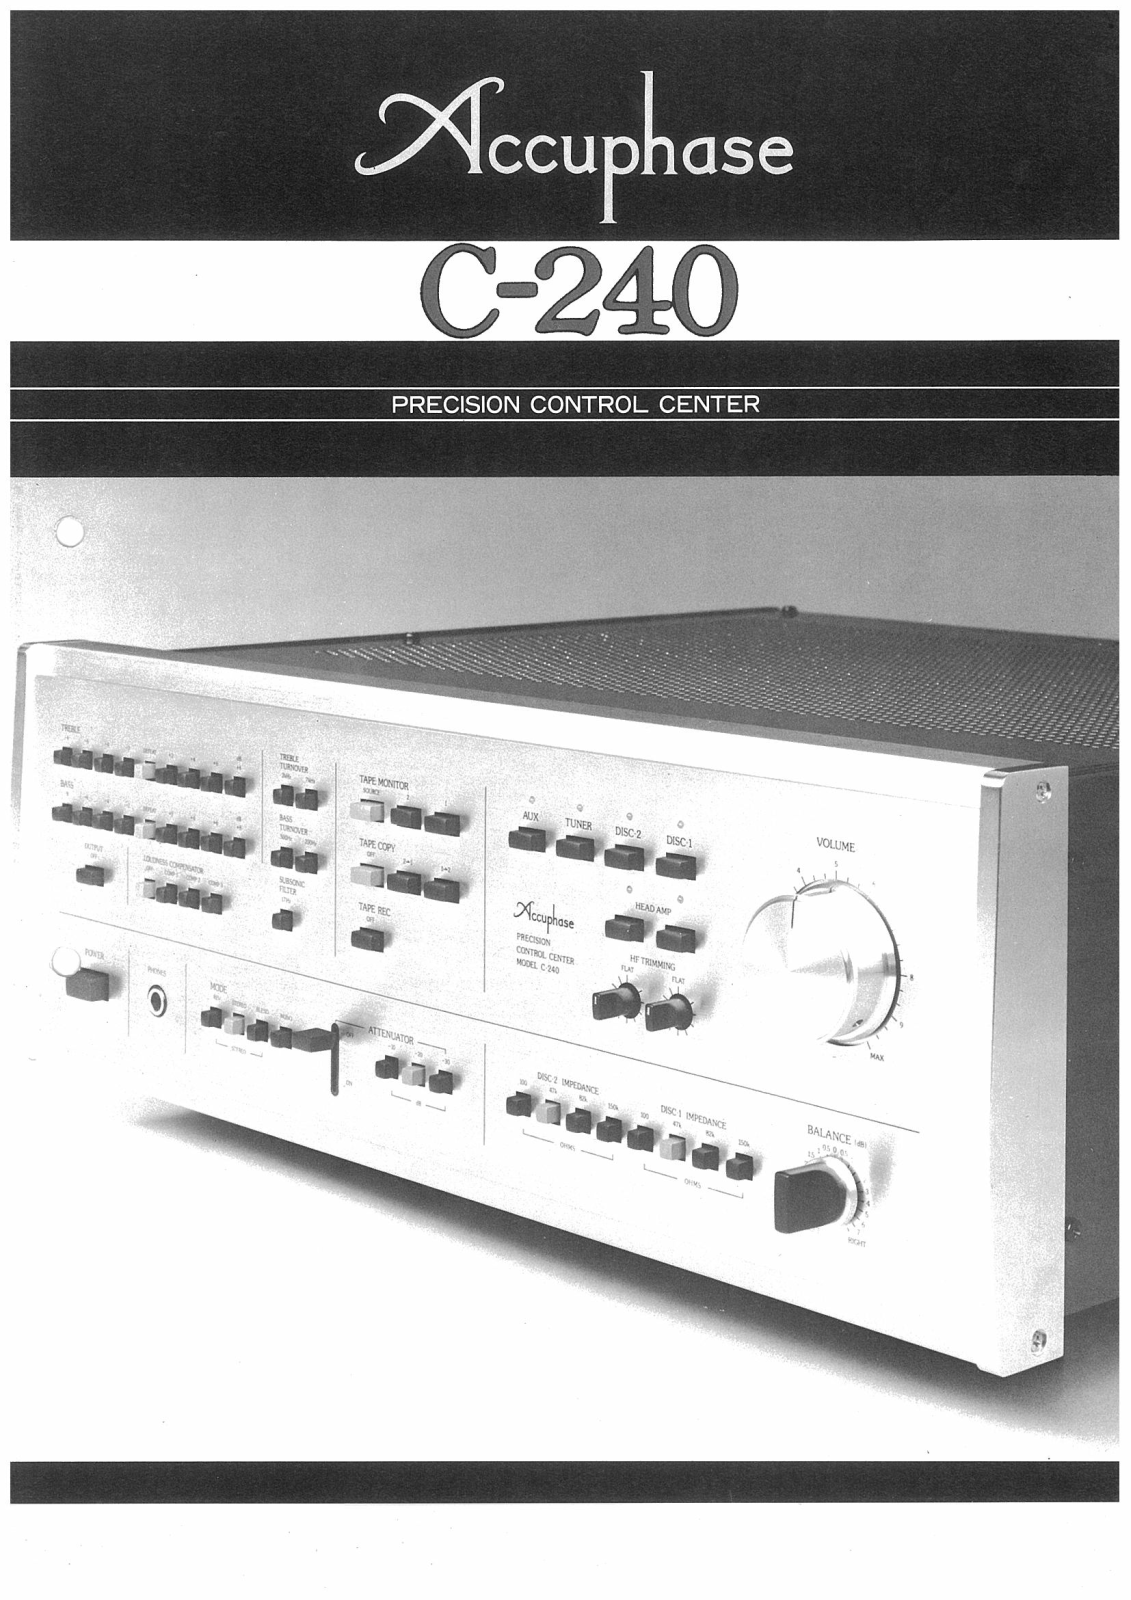 Accuphase C-240 Brochure